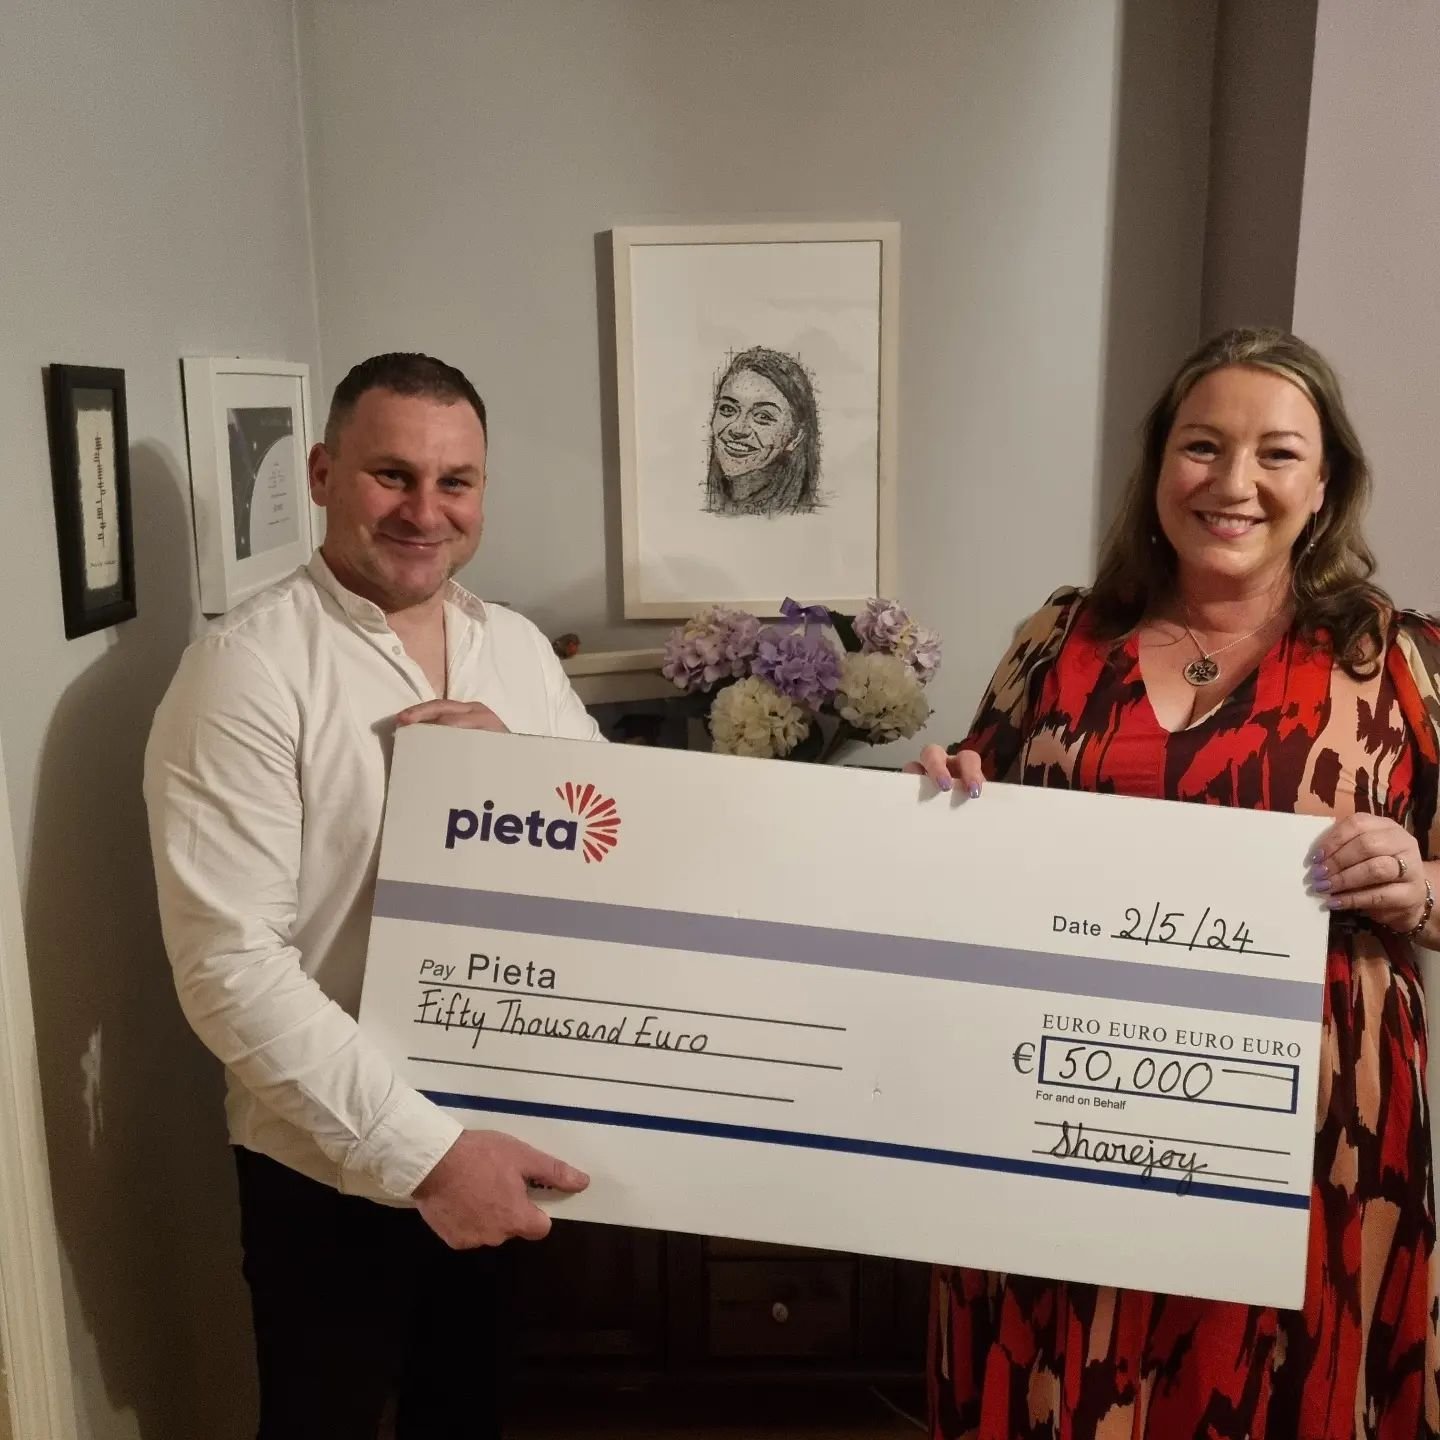 Exciting getting to acknowledge reaching the magic &euro;50,000 raised for @pieta.house . Thats 50 individuals helped through counselling . Proud moment. 💜 Lots more to do. If you want to help or donate, we'd love to hear from you. 

#suicideprevent